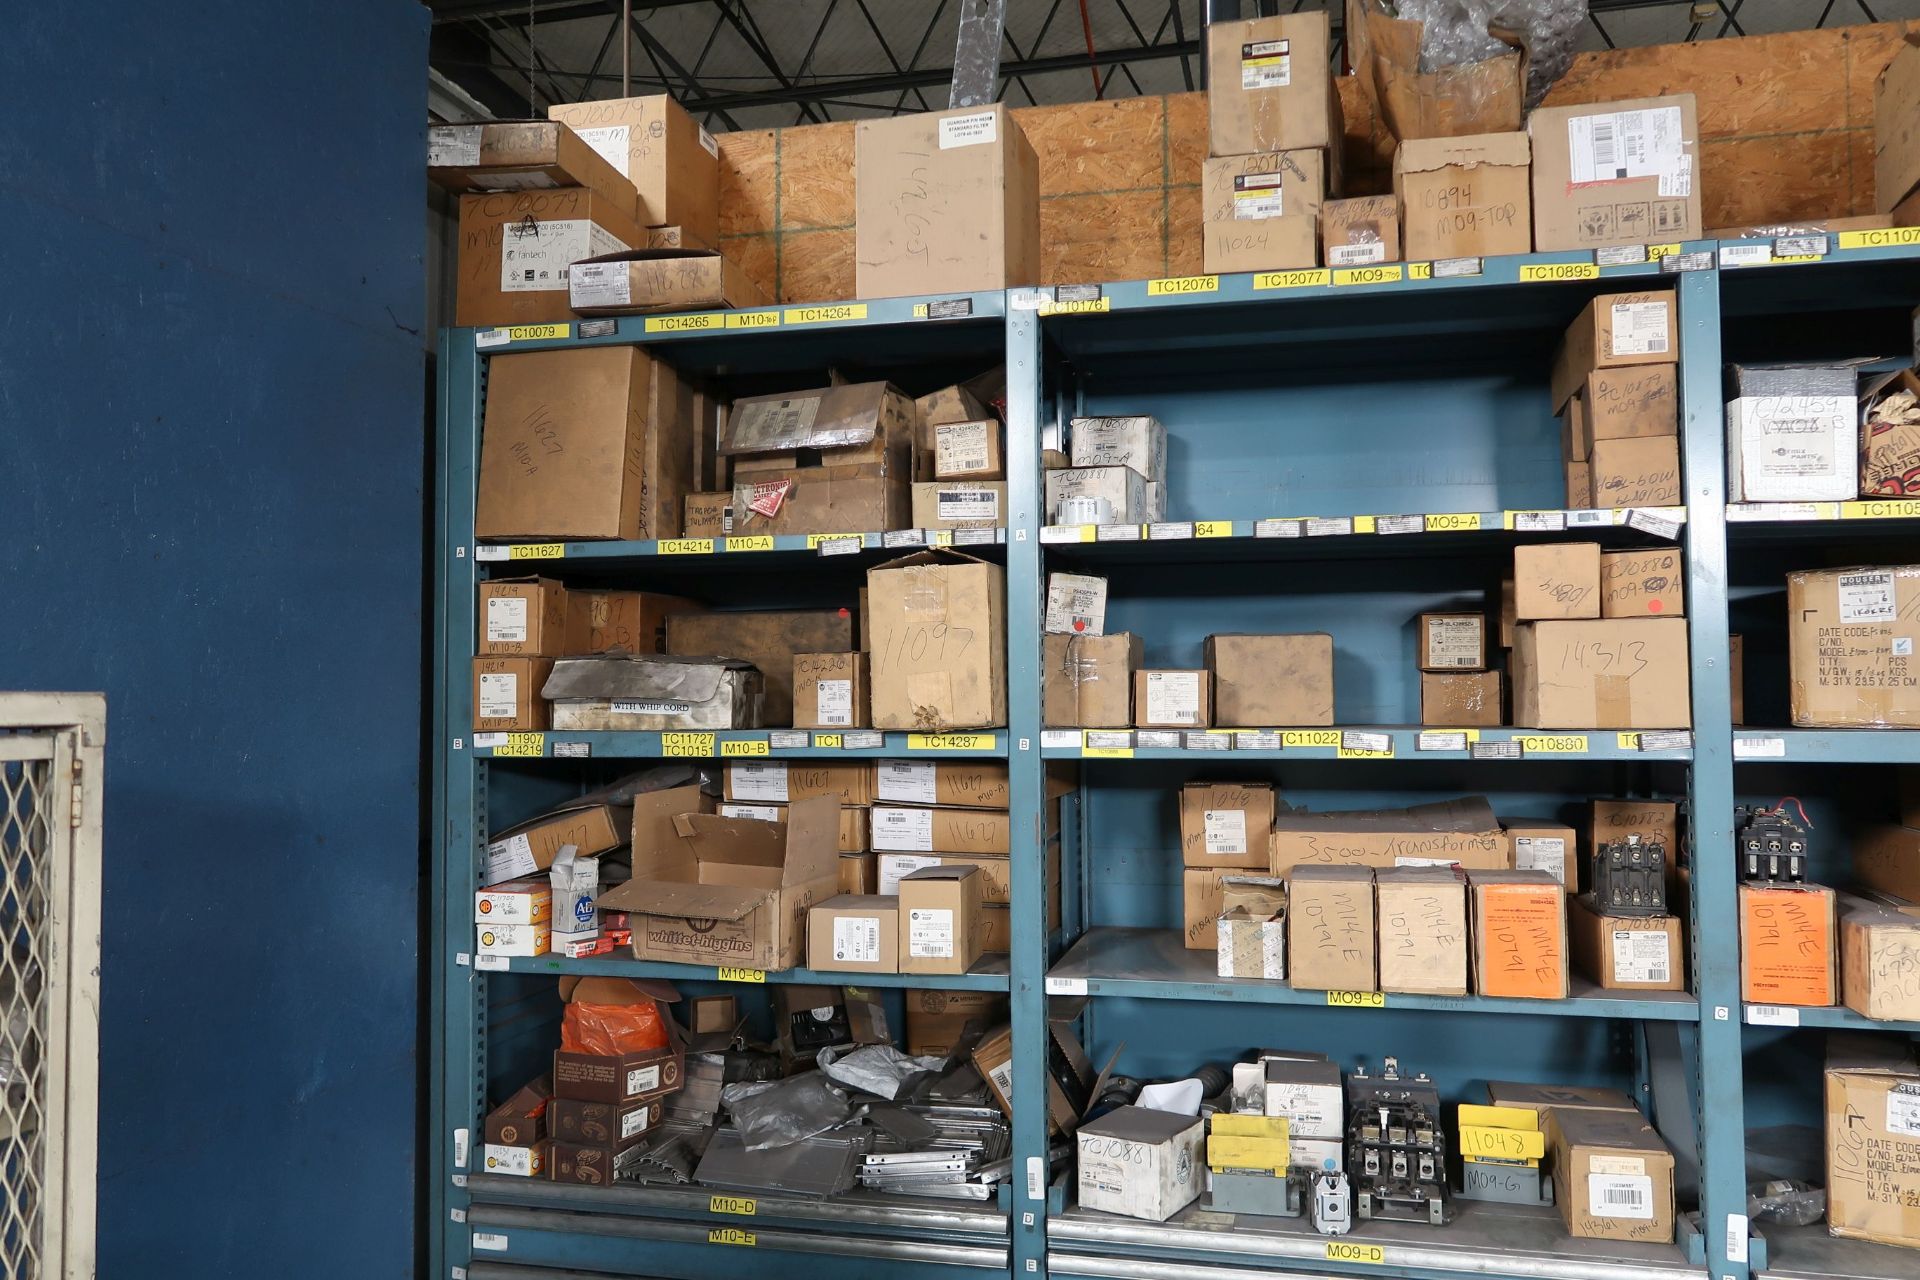 TOOLING CABINETS WITH CONTENTS - MOSTLY MACHINE PARTS **LOADING PRICE DUE TO ERRA - $2,000.00** - Image 52 of 59